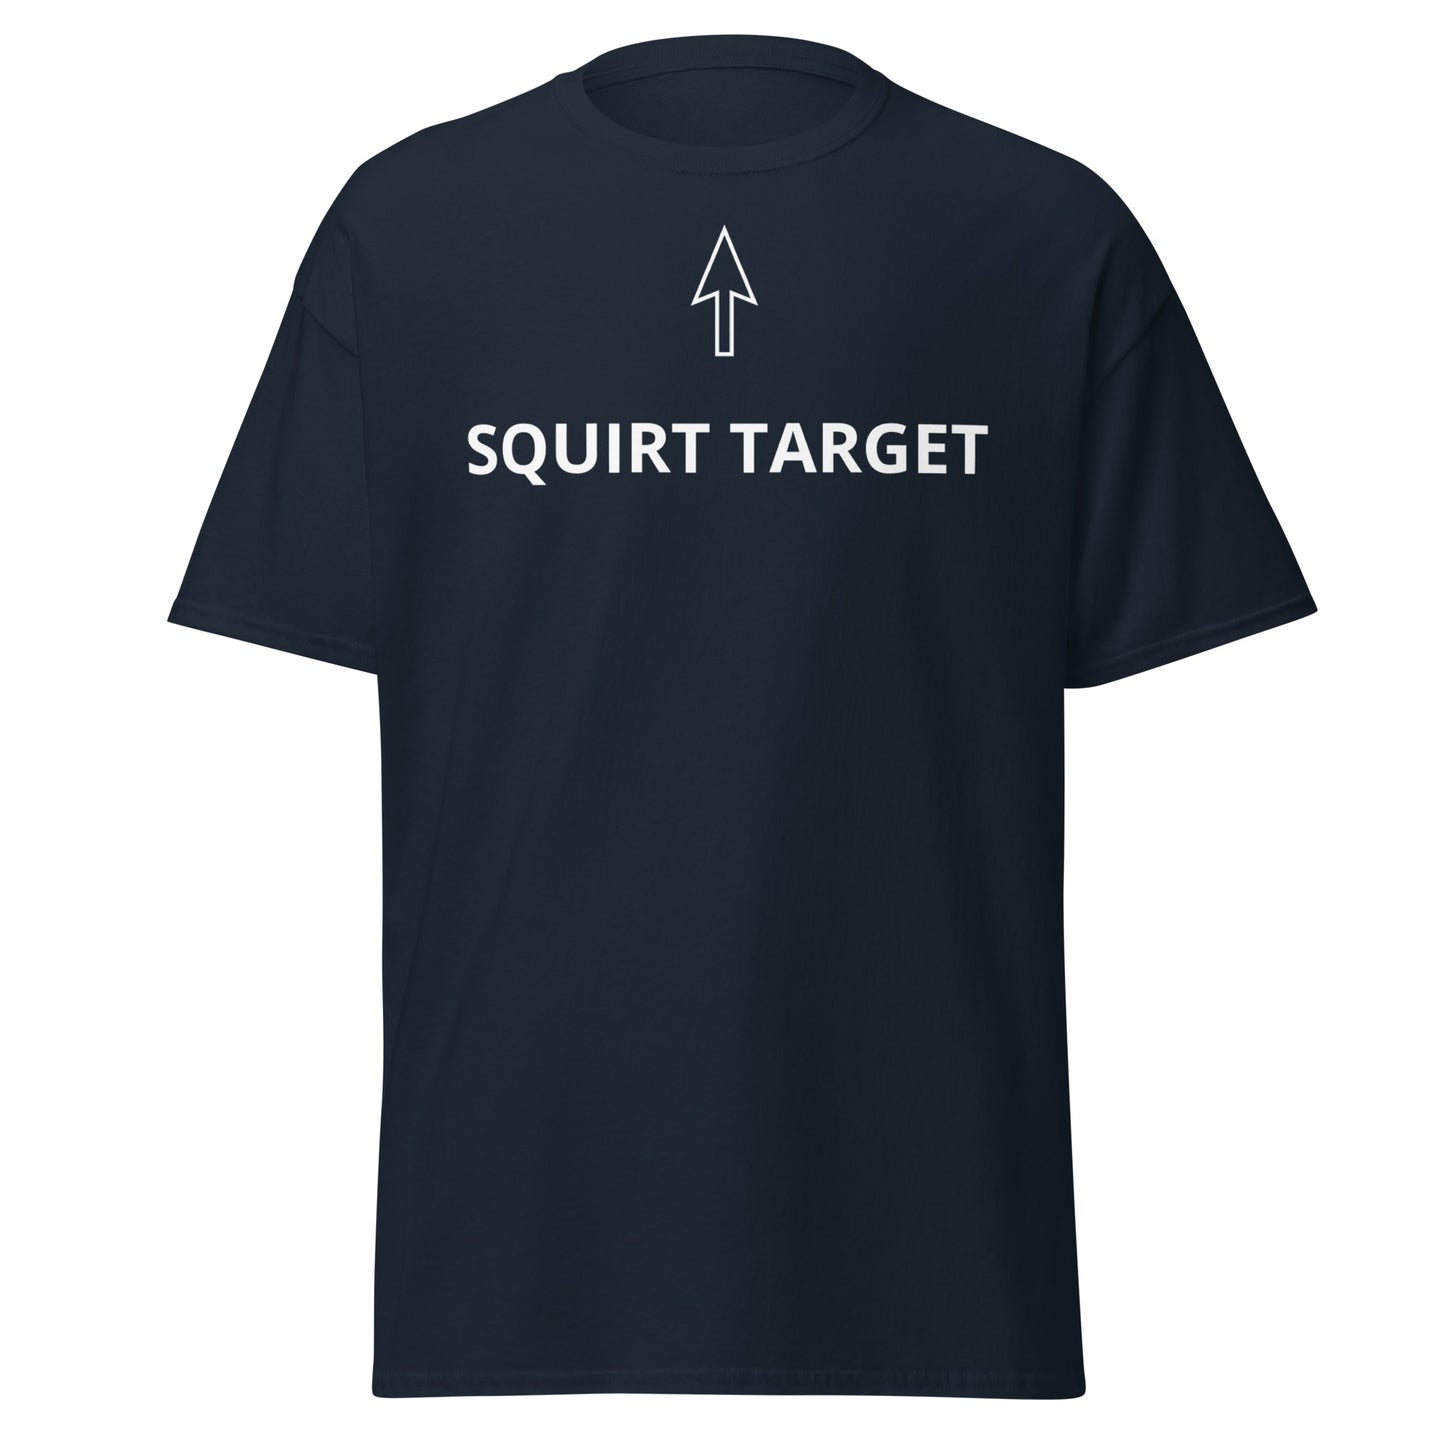 SQUIRT TARGET